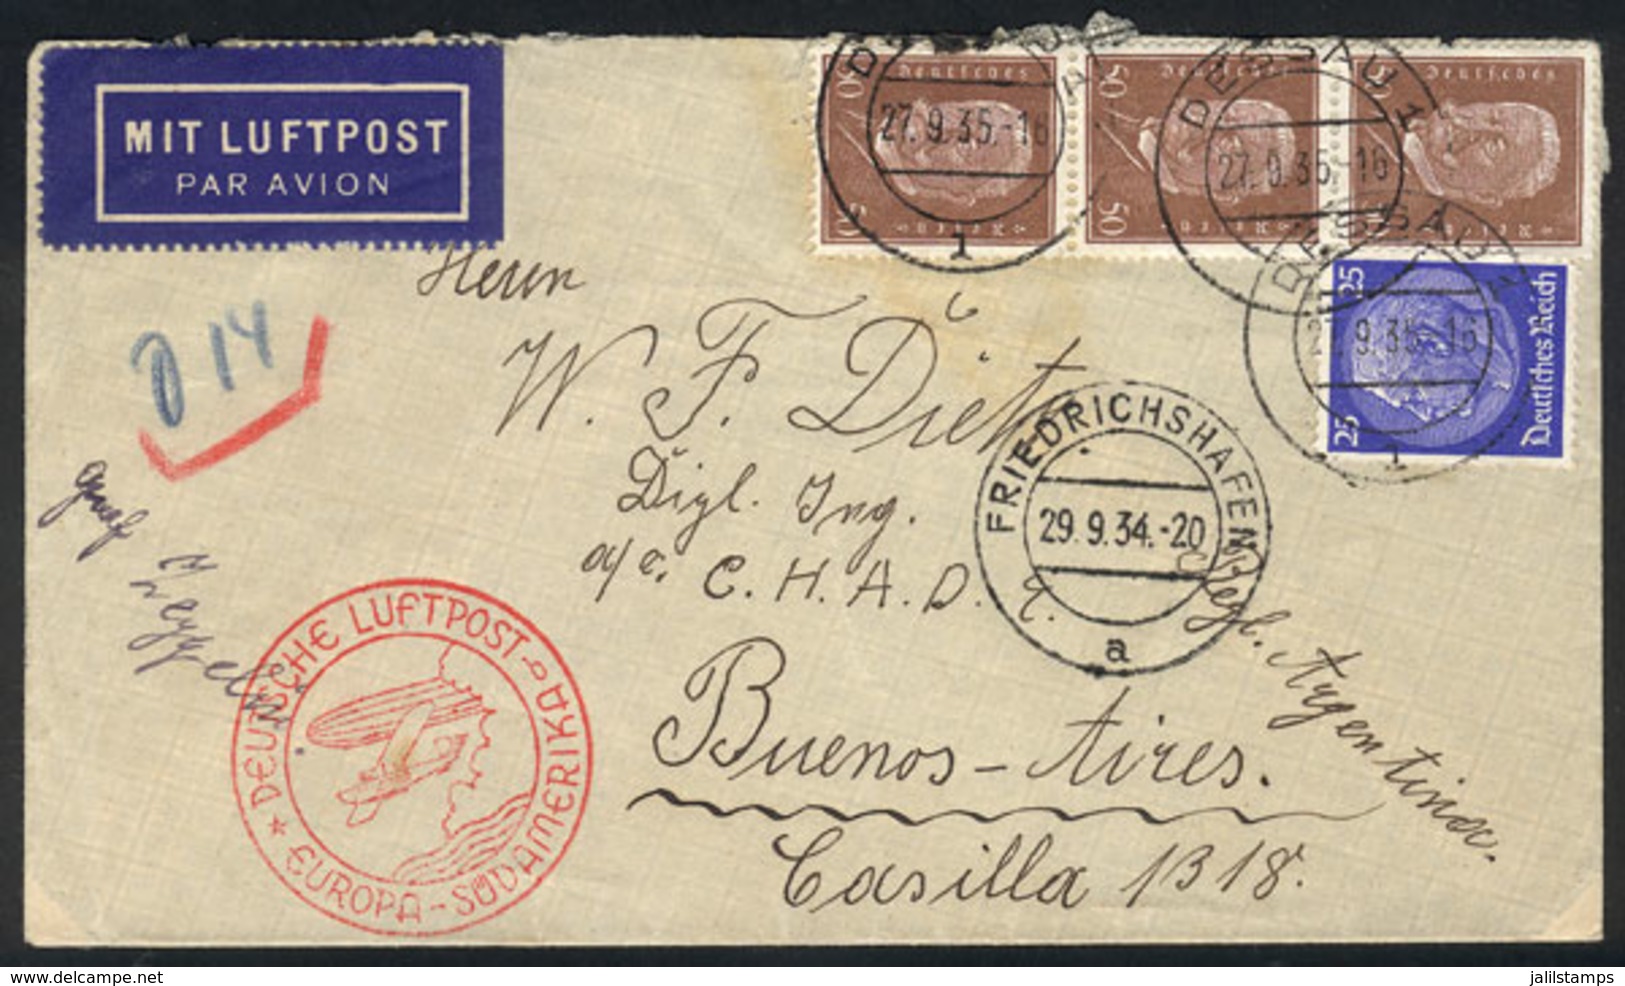 GERMANY: Airmail Cover Flown By ZEPPELIN, Sent From Dessau To Buenos Aires On 27/SE/1935, VF Quality! - Prephilately